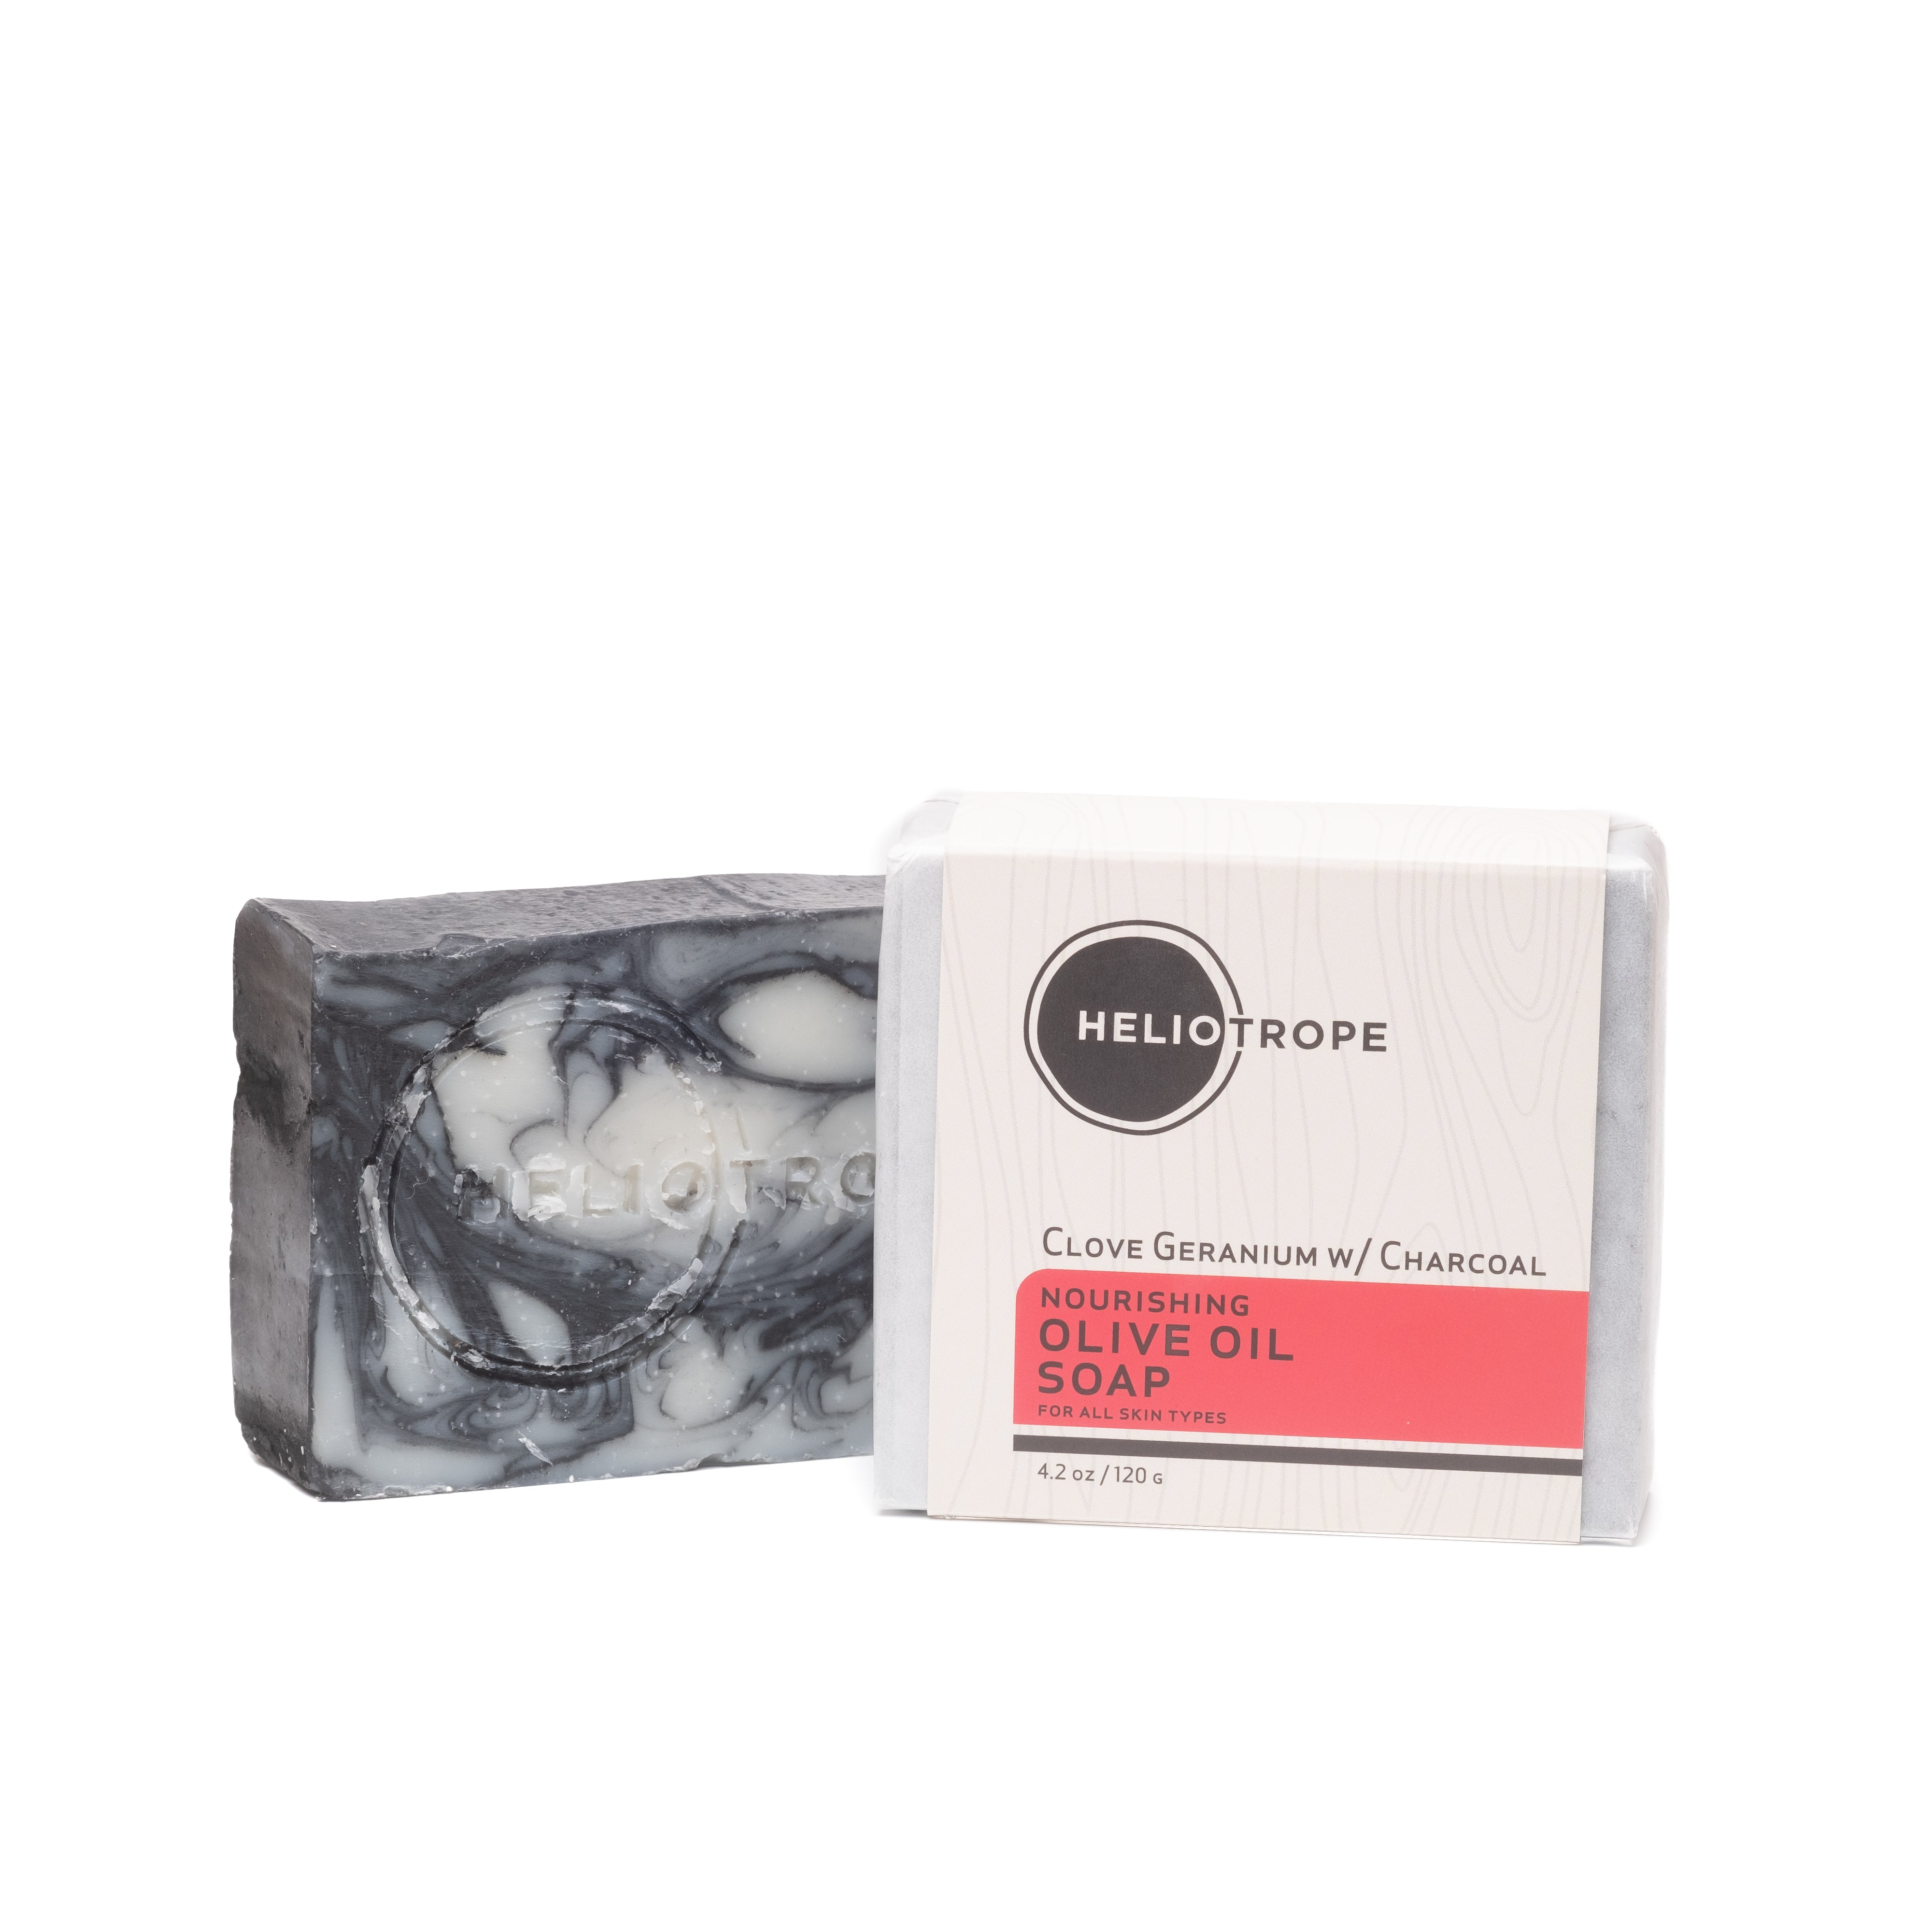  Nourishing Olive Oil Soaps by Heliotrope San Francisco Heliotrope San Francisco Perfumarie